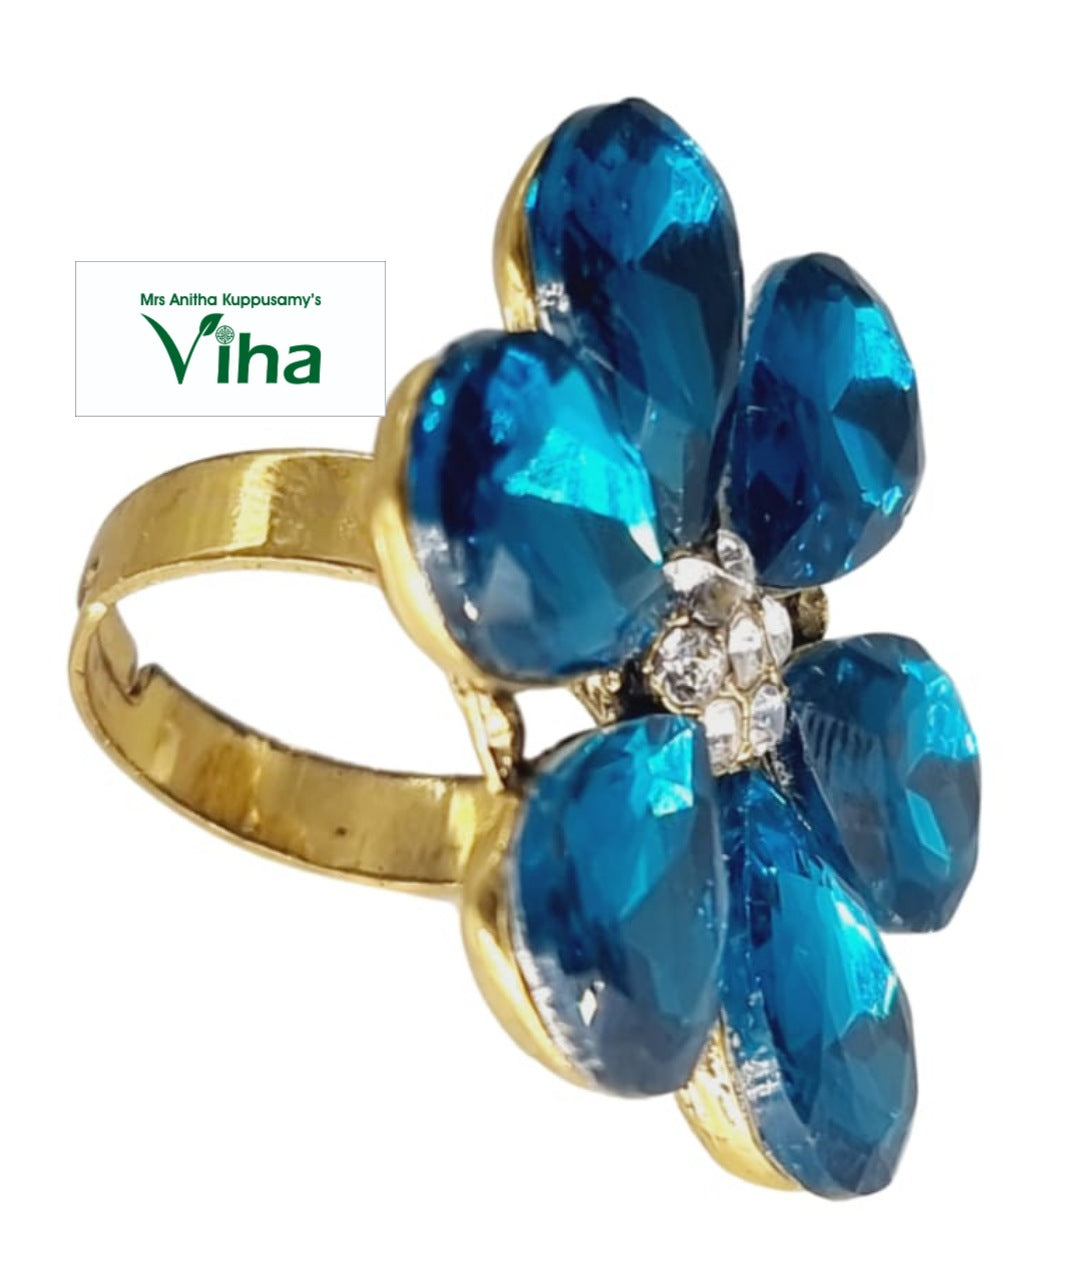 Buy quality 916 Gold Fancy Blue Stone Ring PJ-R019 in Ahmedabad